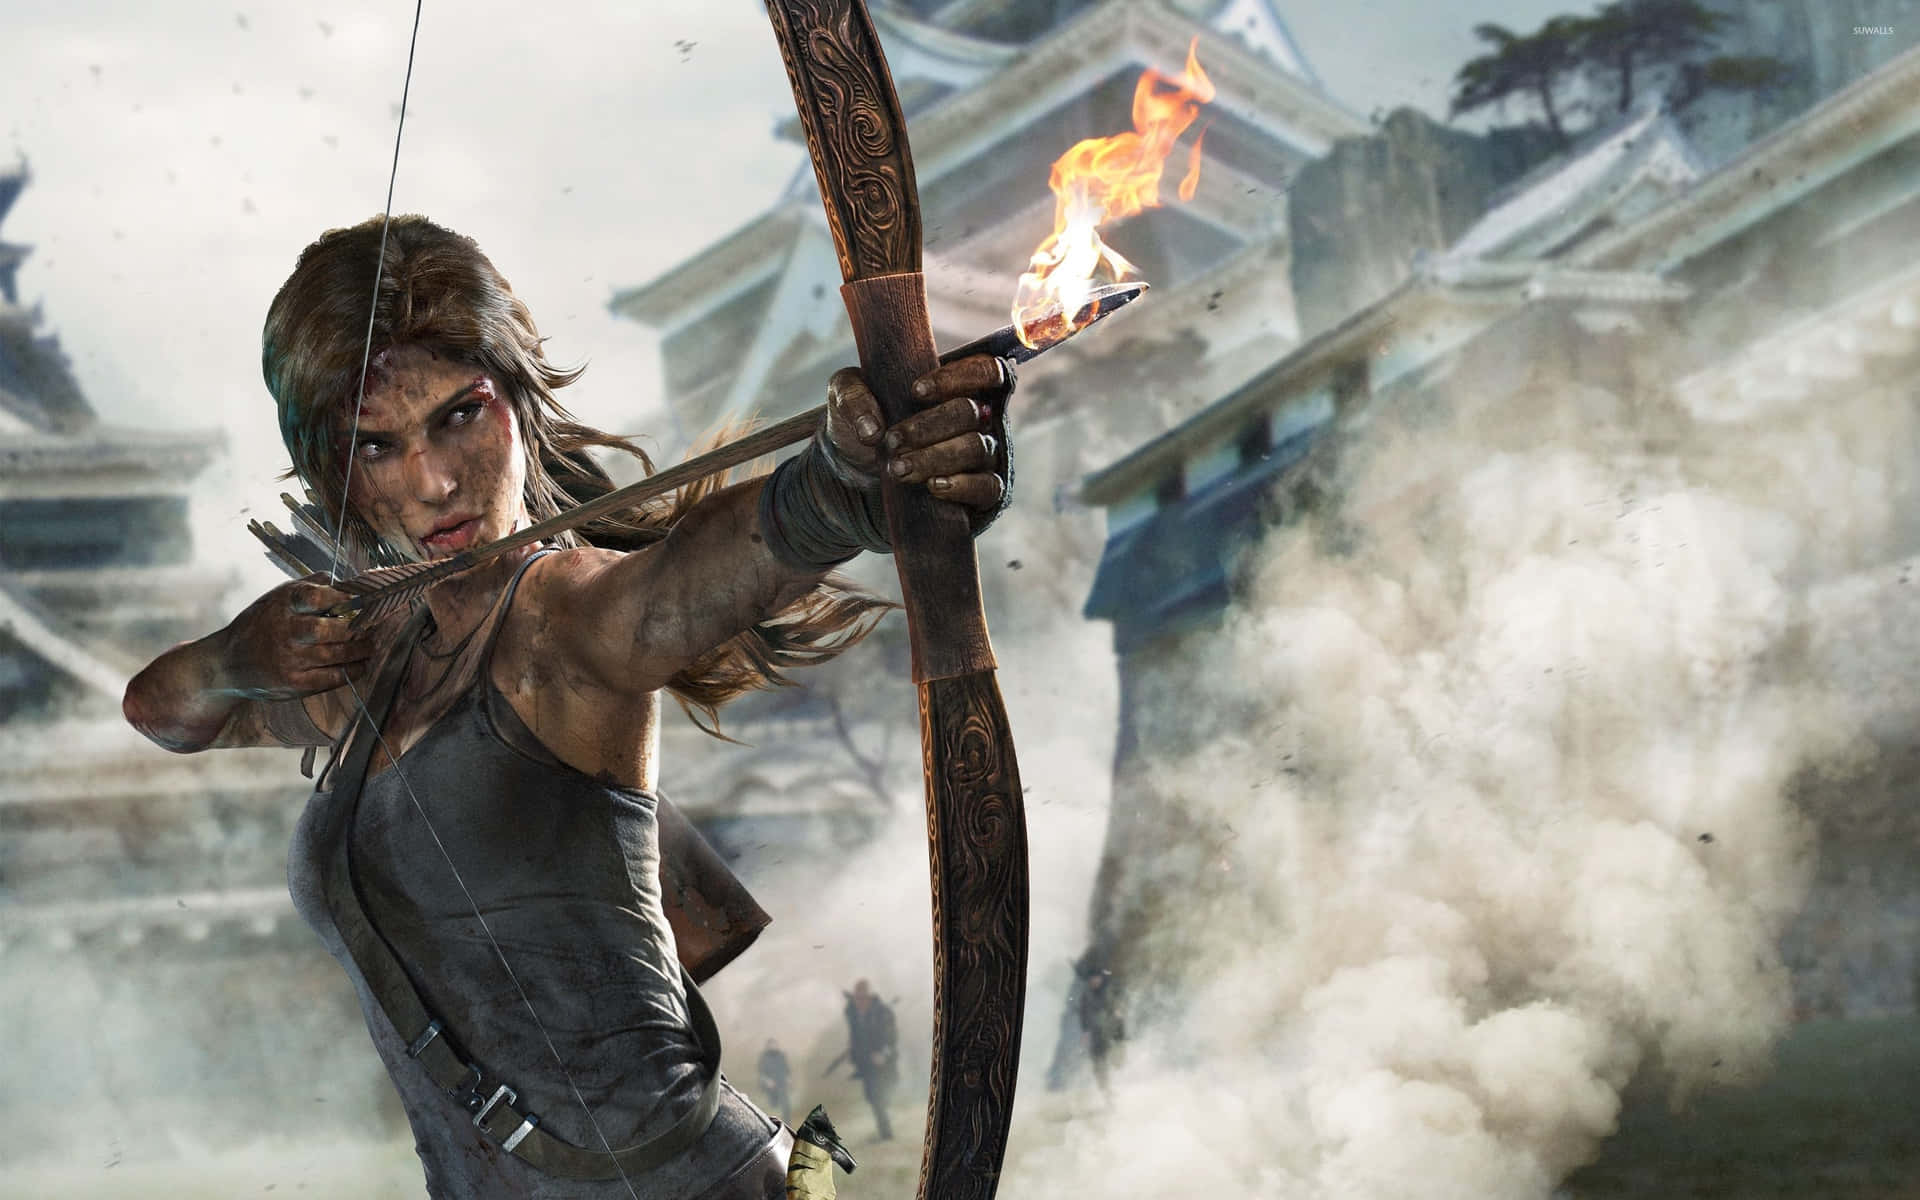 The Tomb Raider Is Aiming Her Bow At A Castle Wallpaper